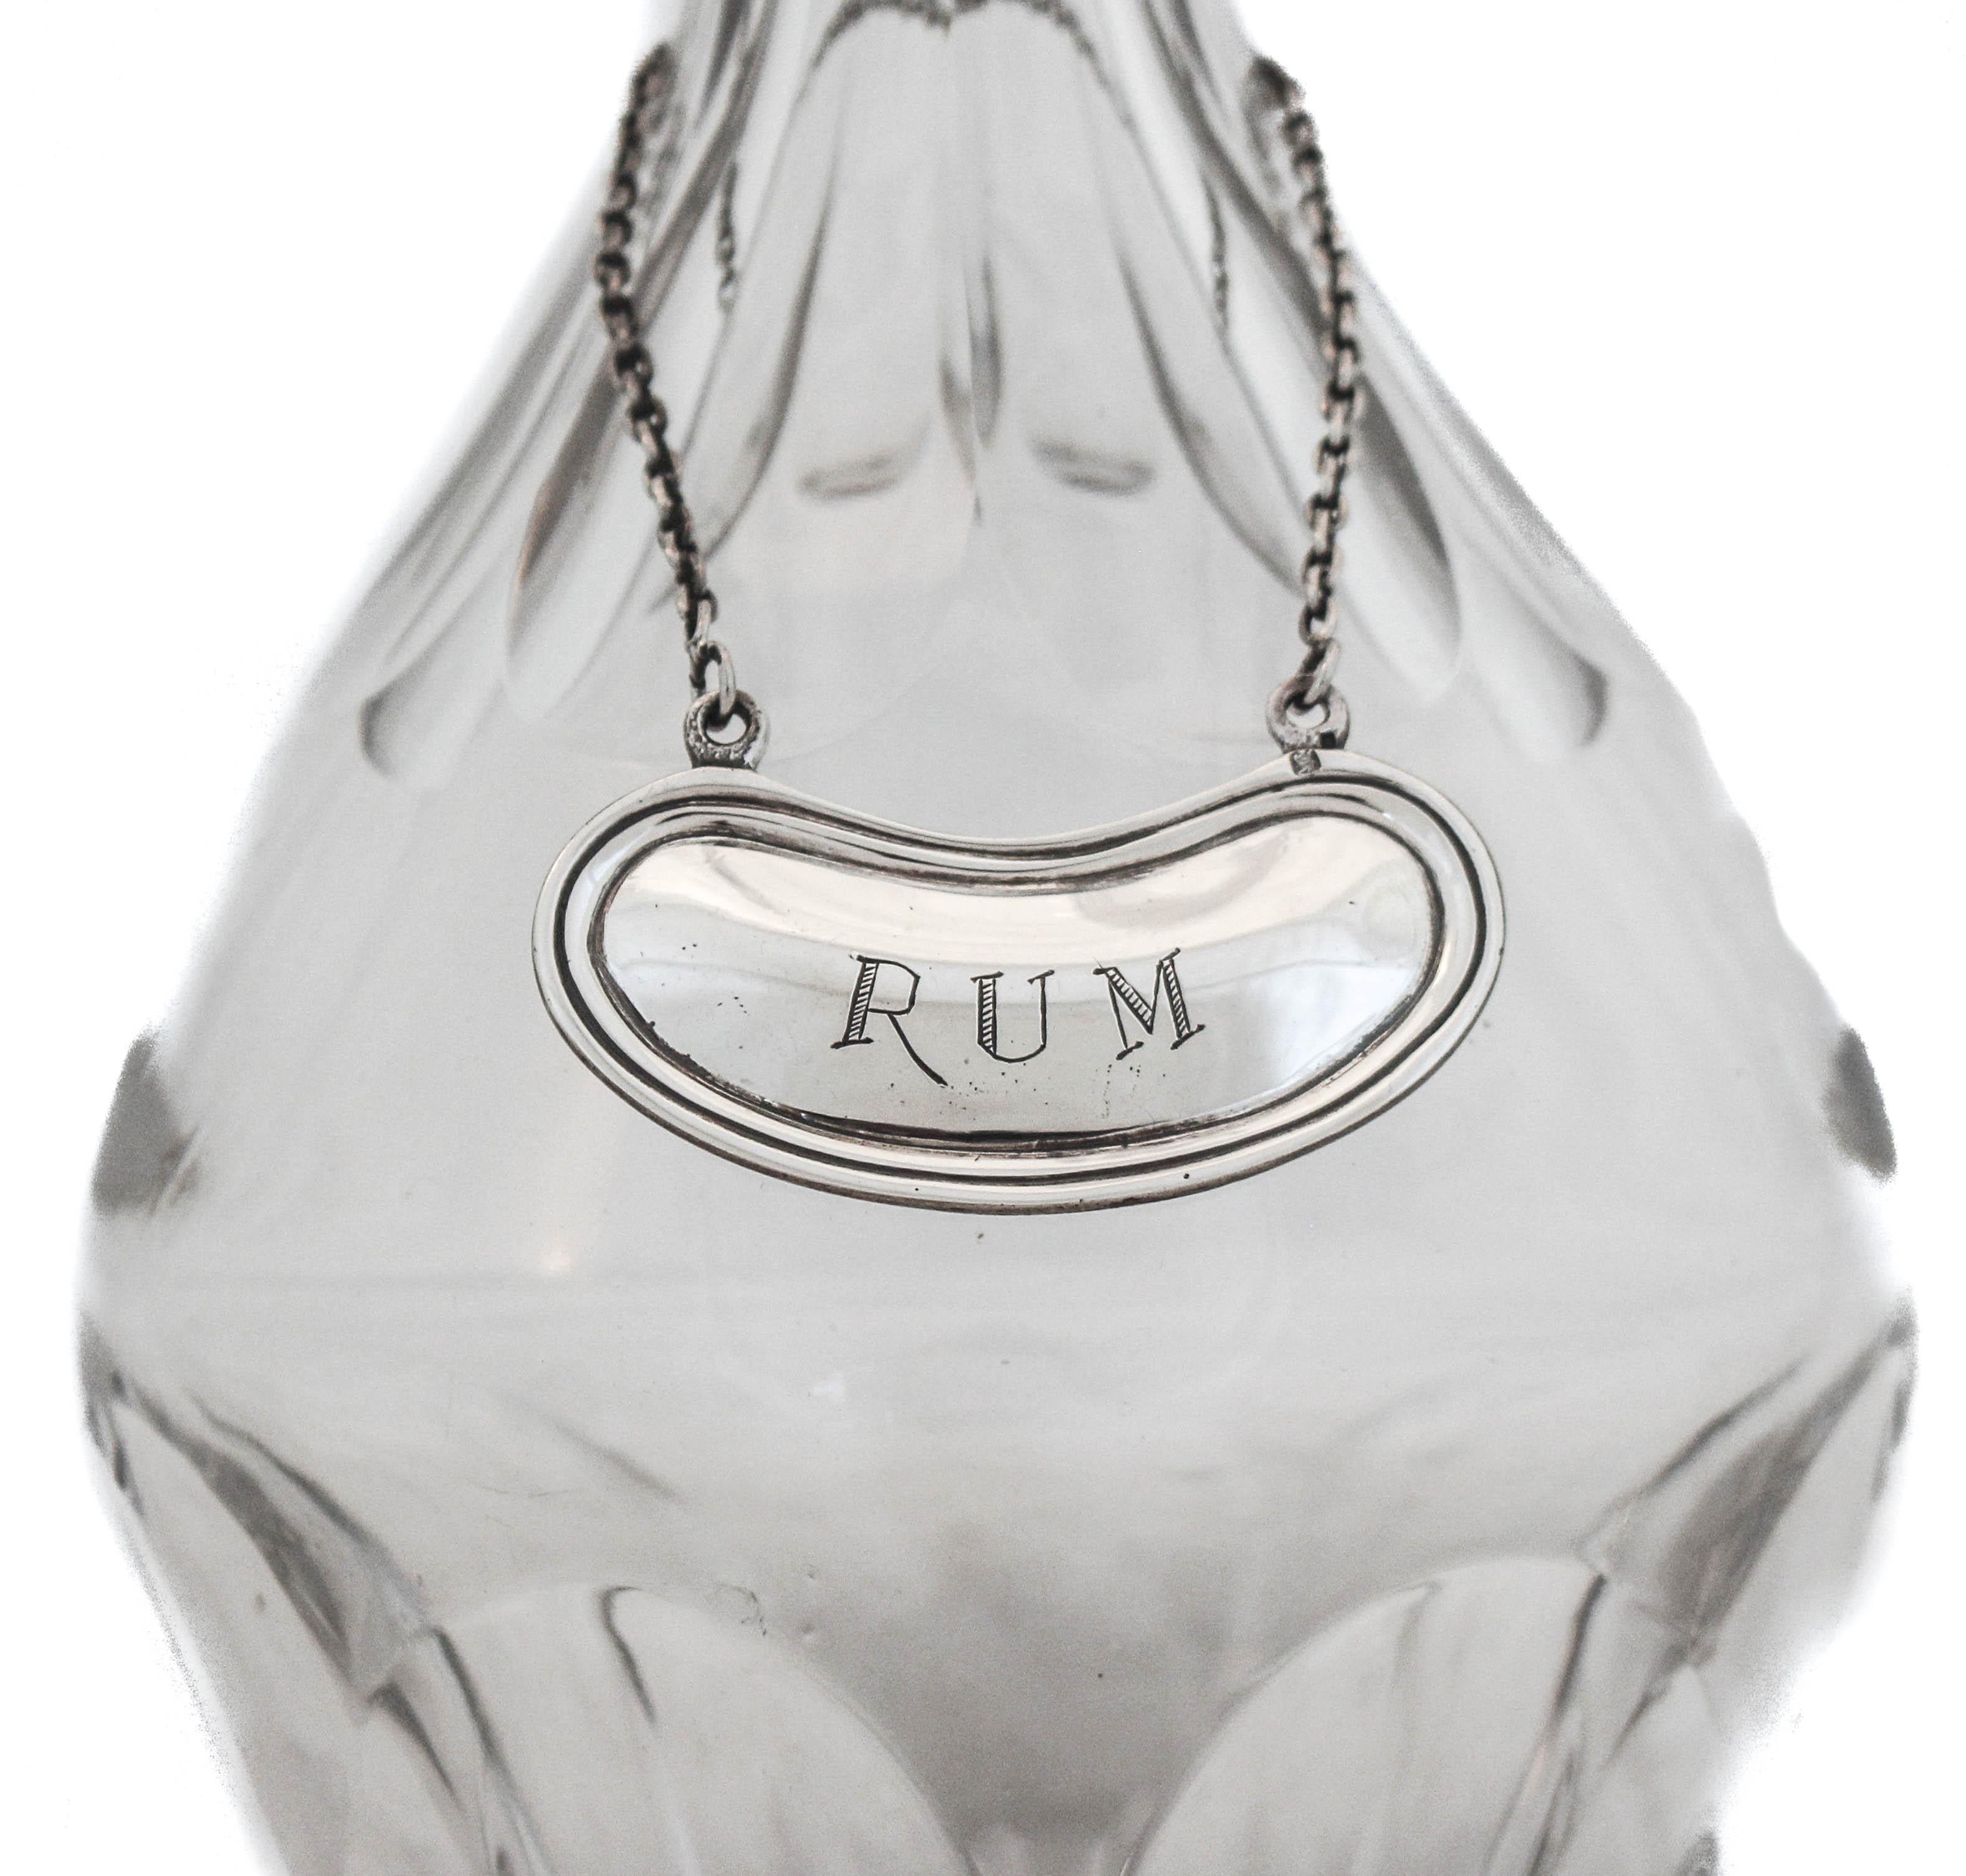 This liquor label is crafted of sterling silver, with the word 